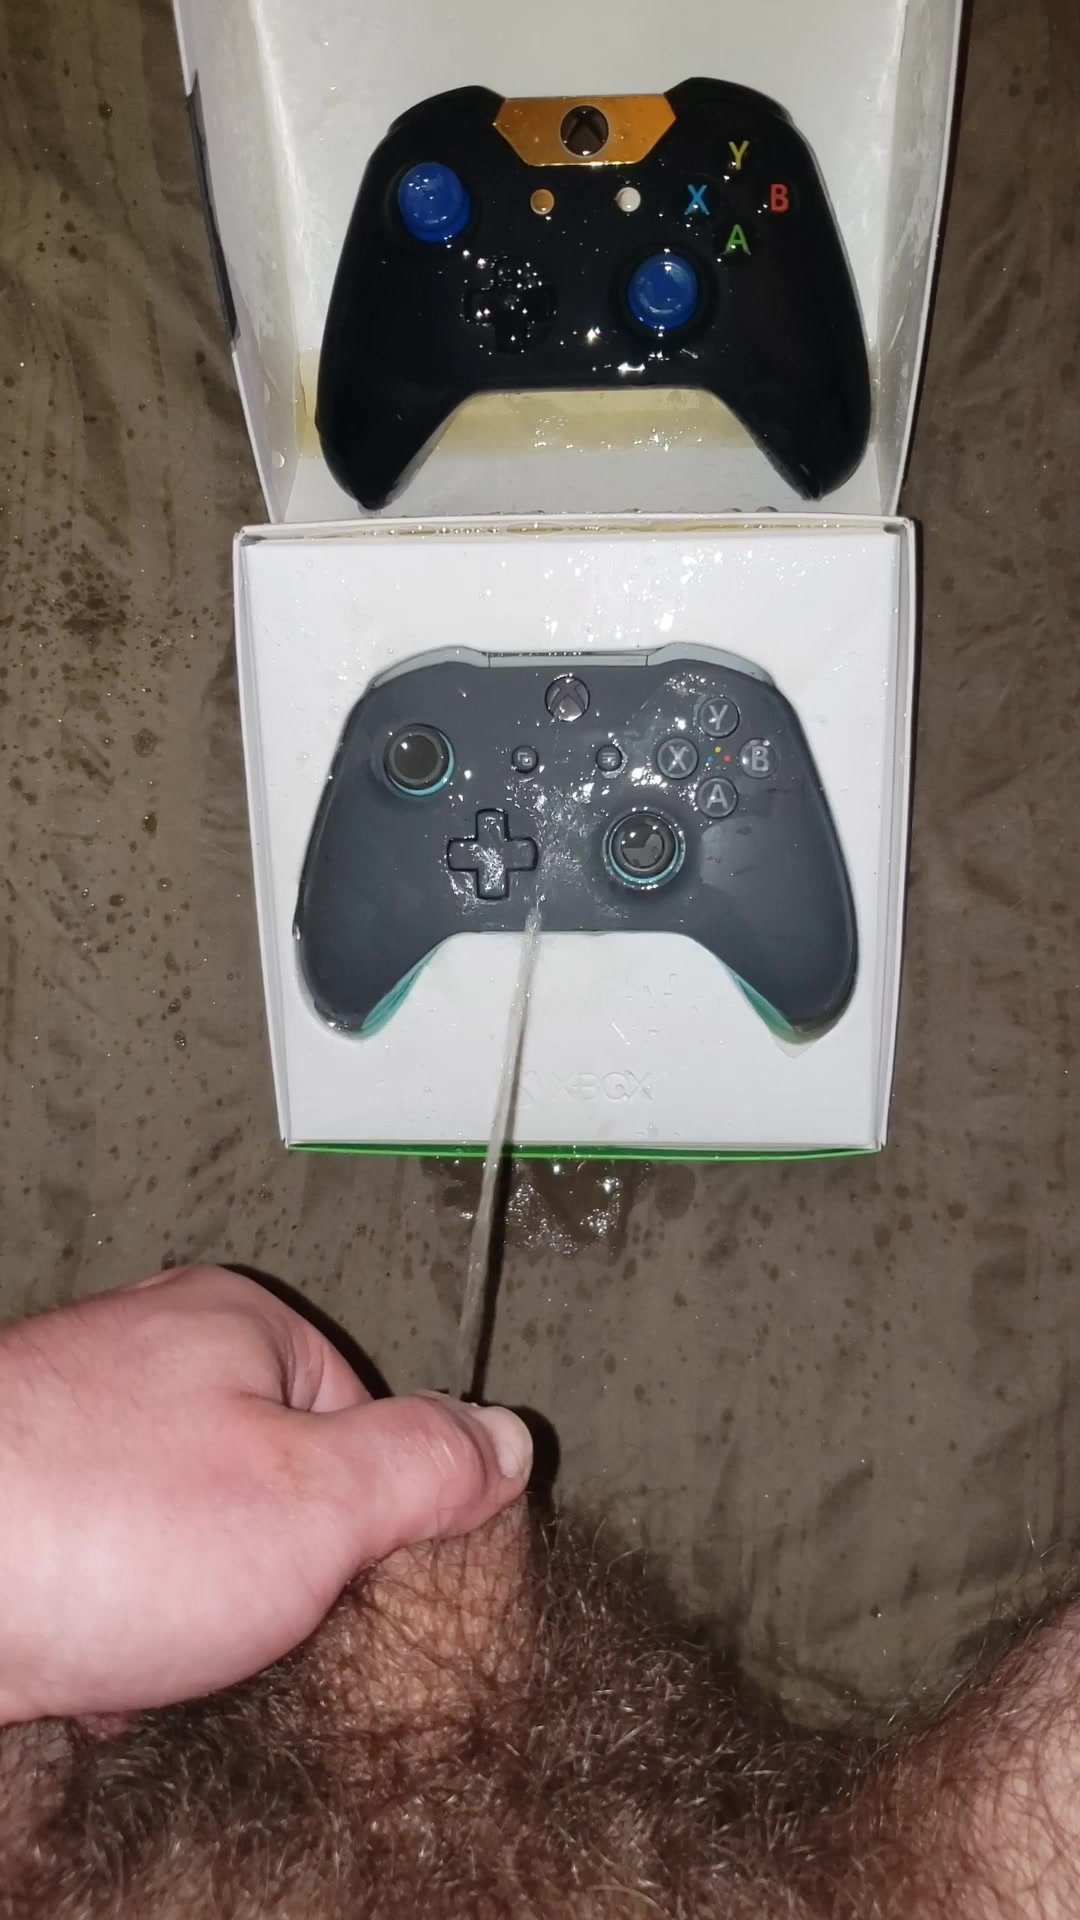 Piss on xbox controller